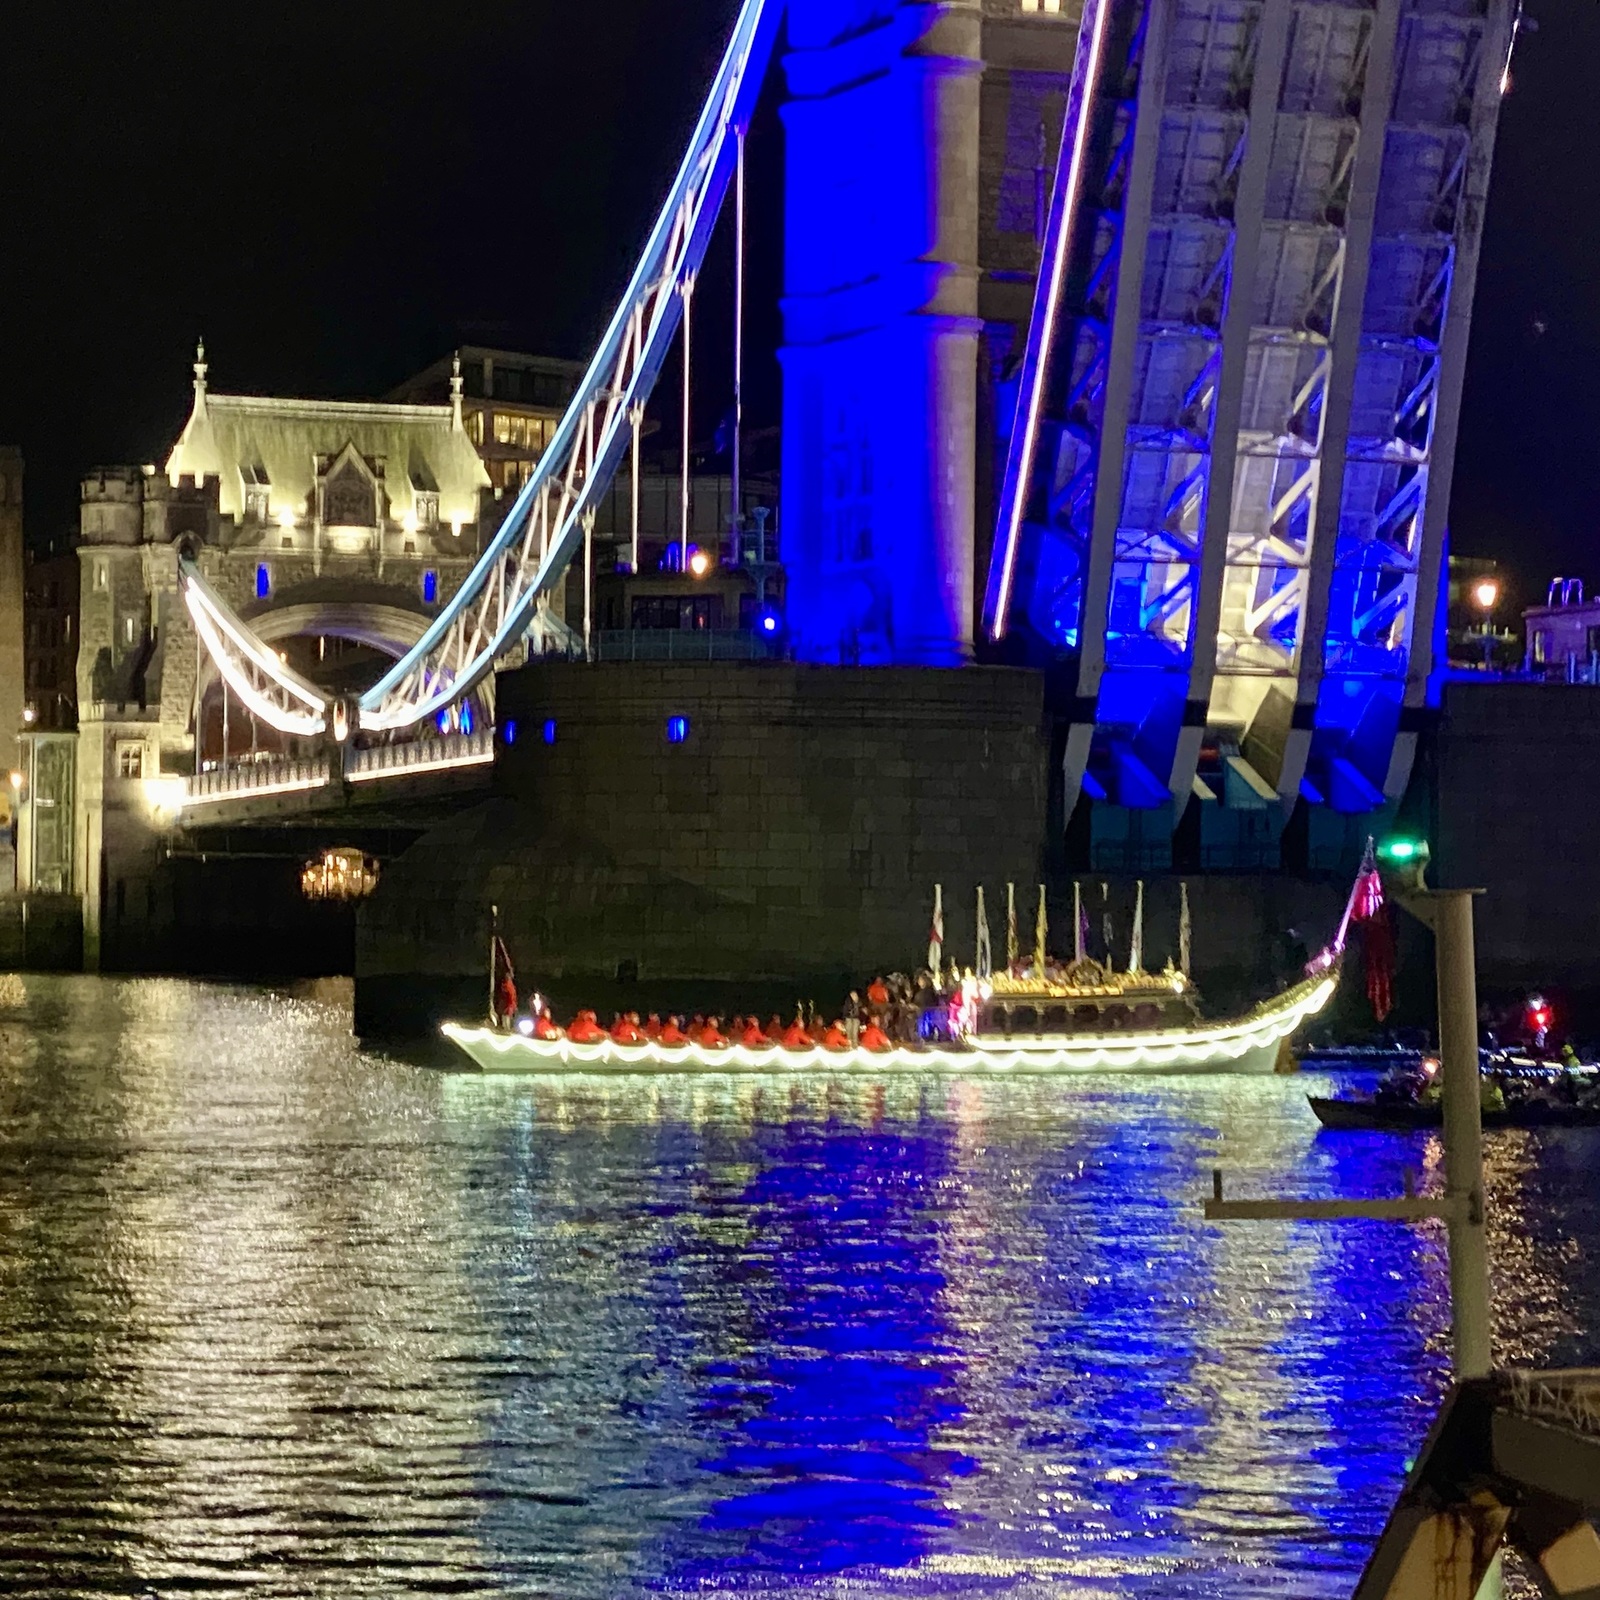 24 Sept 22 - A colourful, yet respectful, Reflection’s Pageant saw Gloriana pass under a raised Tower Bridge in full salute.